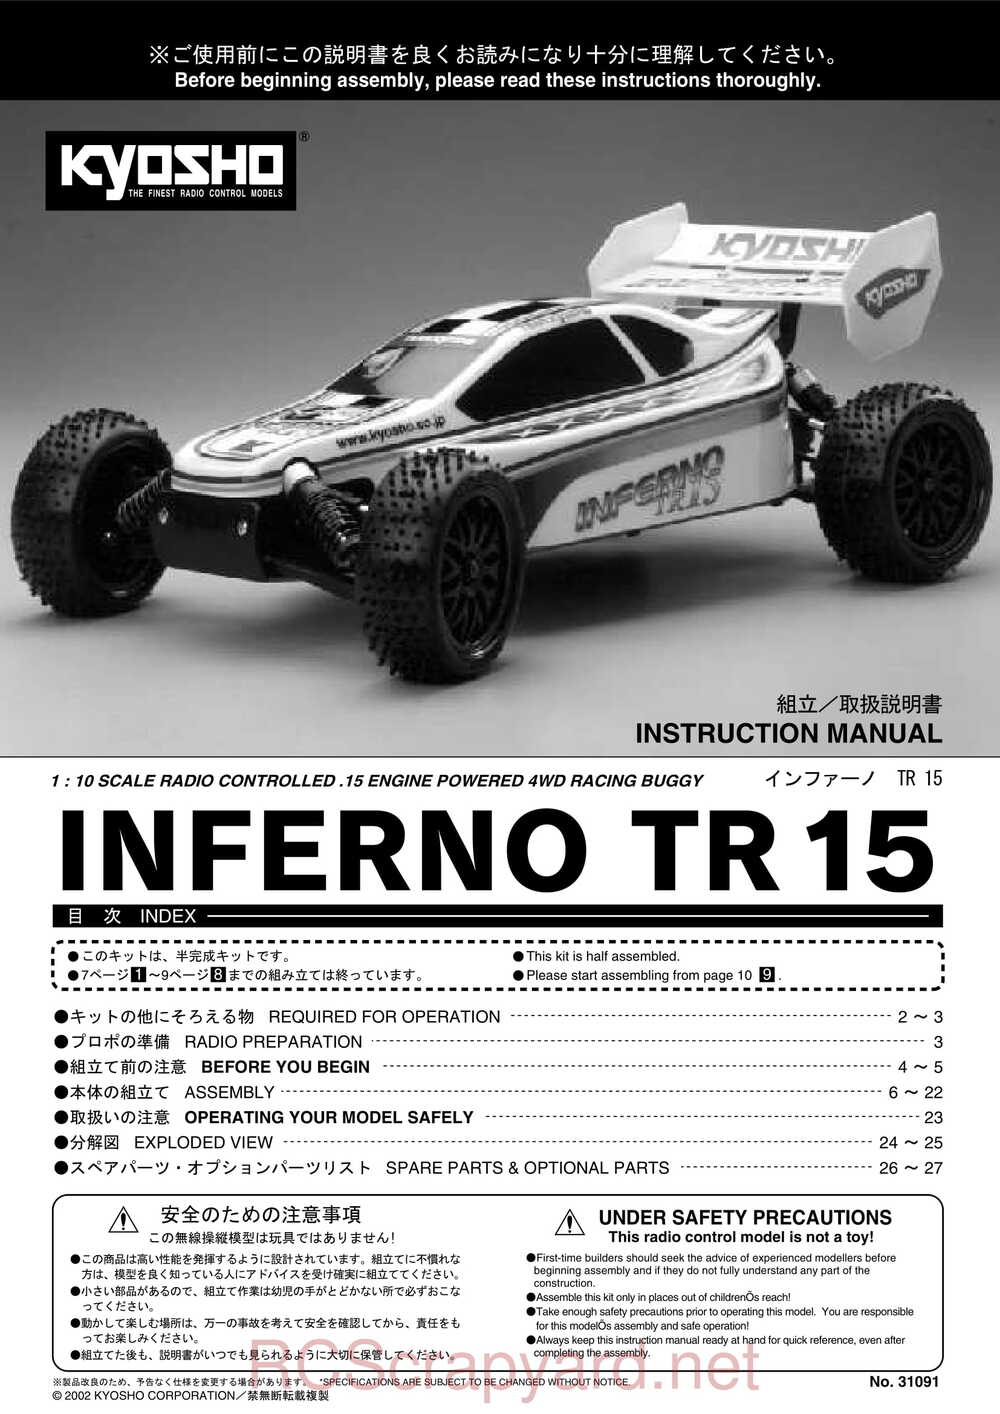 Kyosho - 31091 - Inferno-TR15 - Manual - Page 01